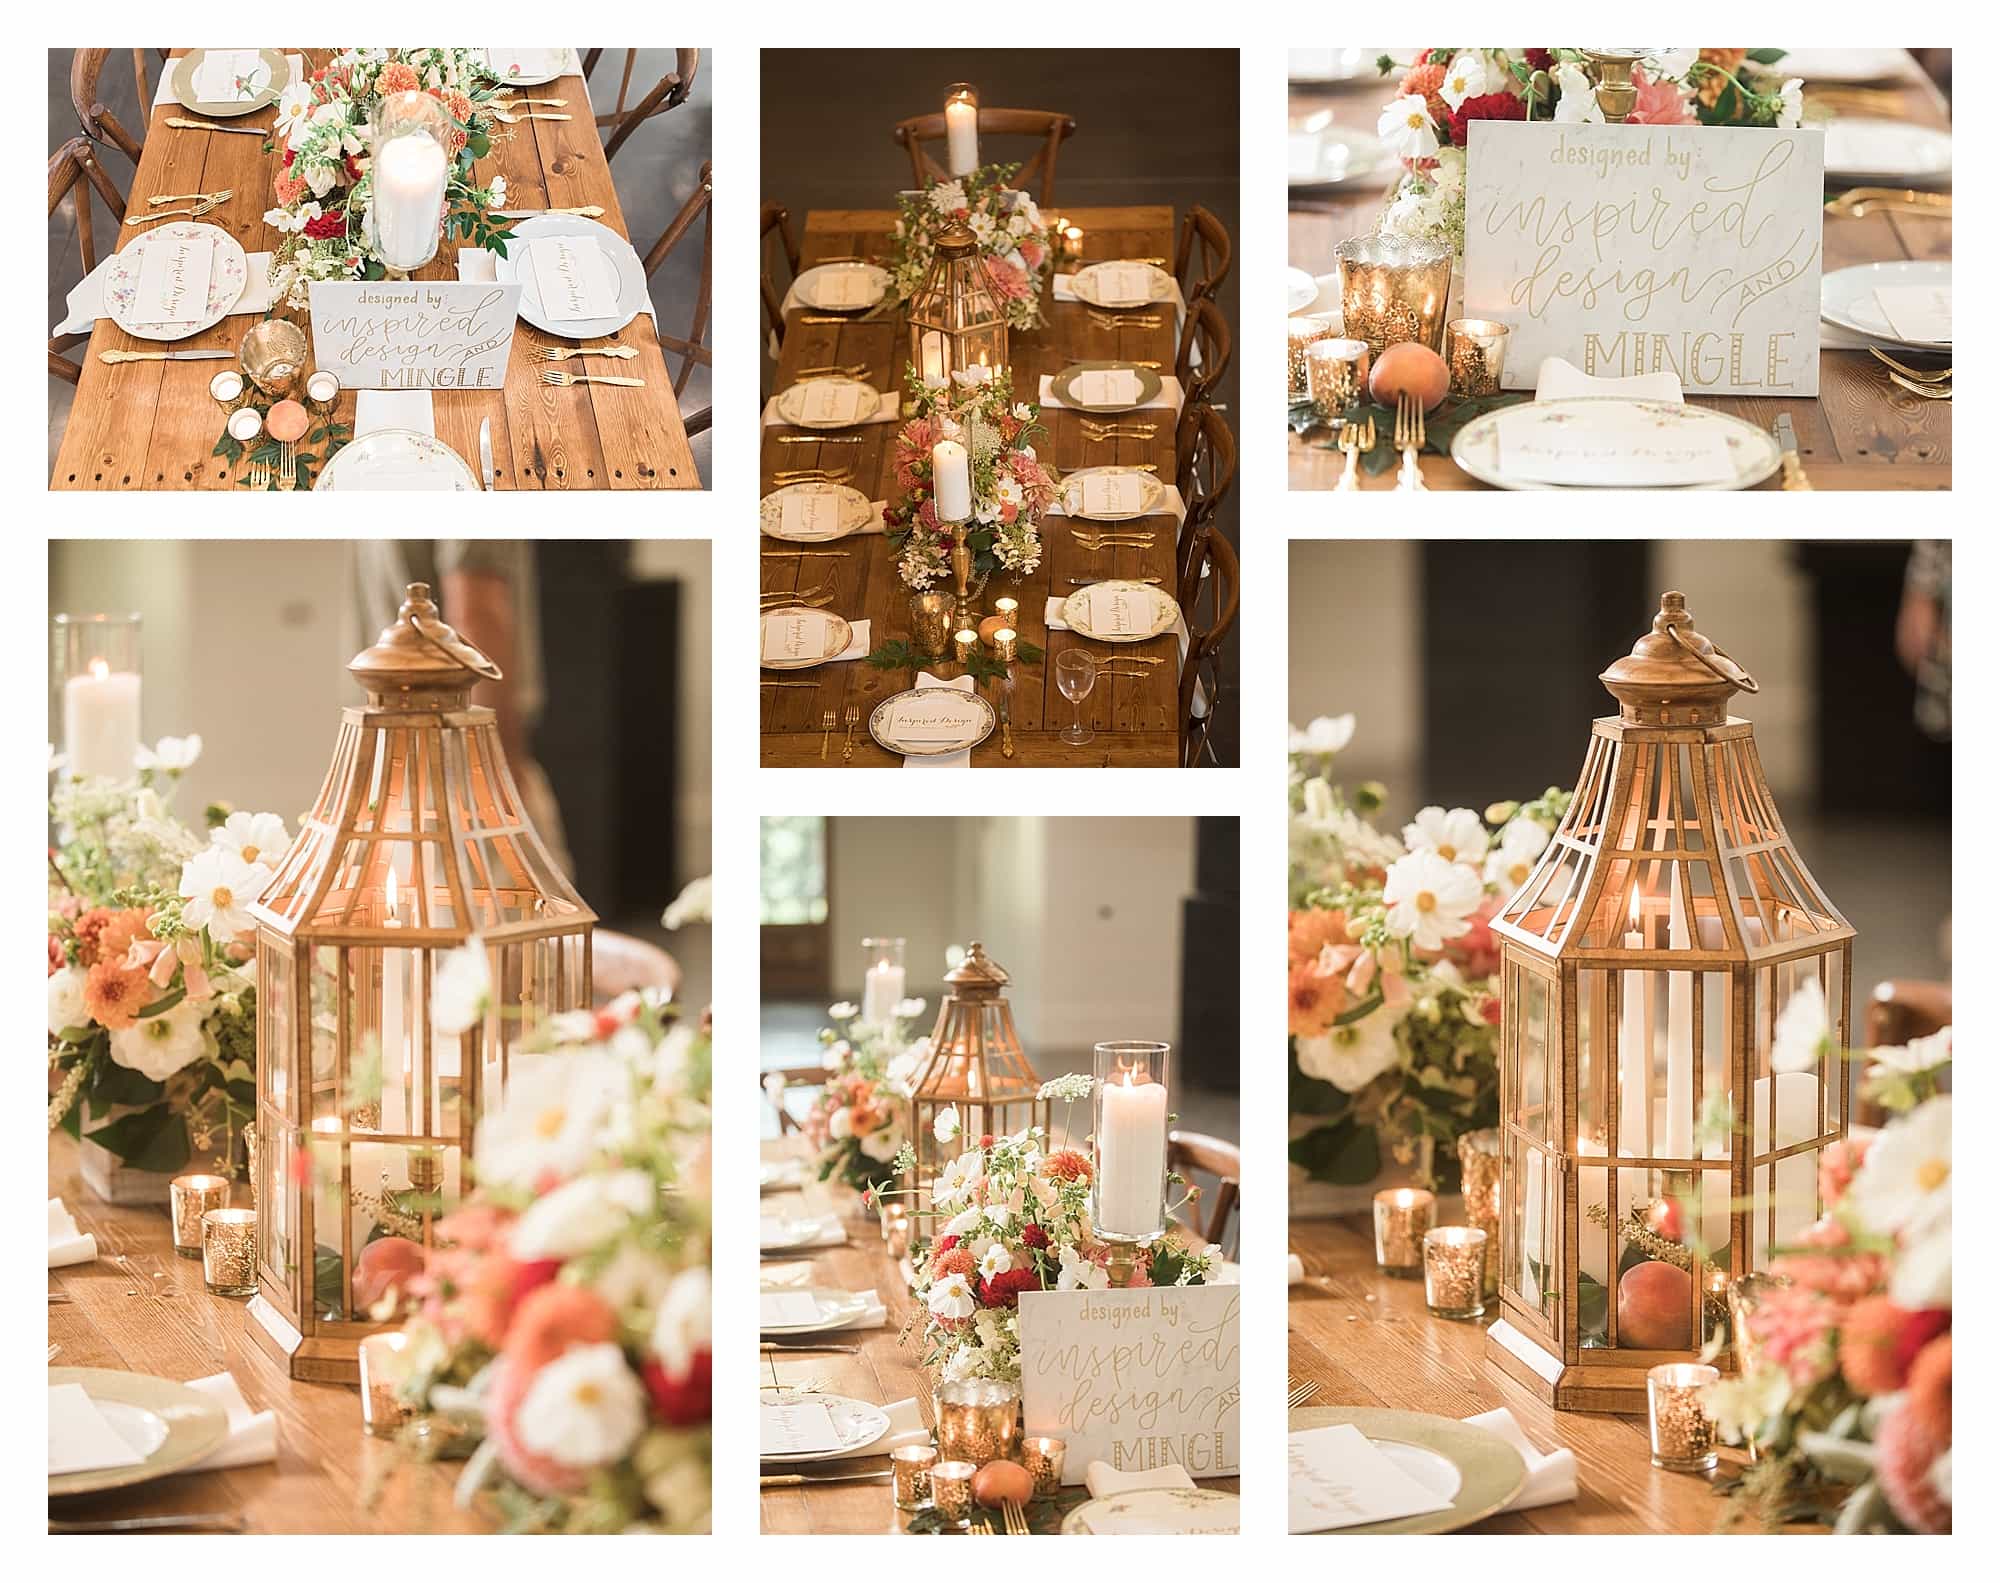 Peaches and greenery with lantern and candles